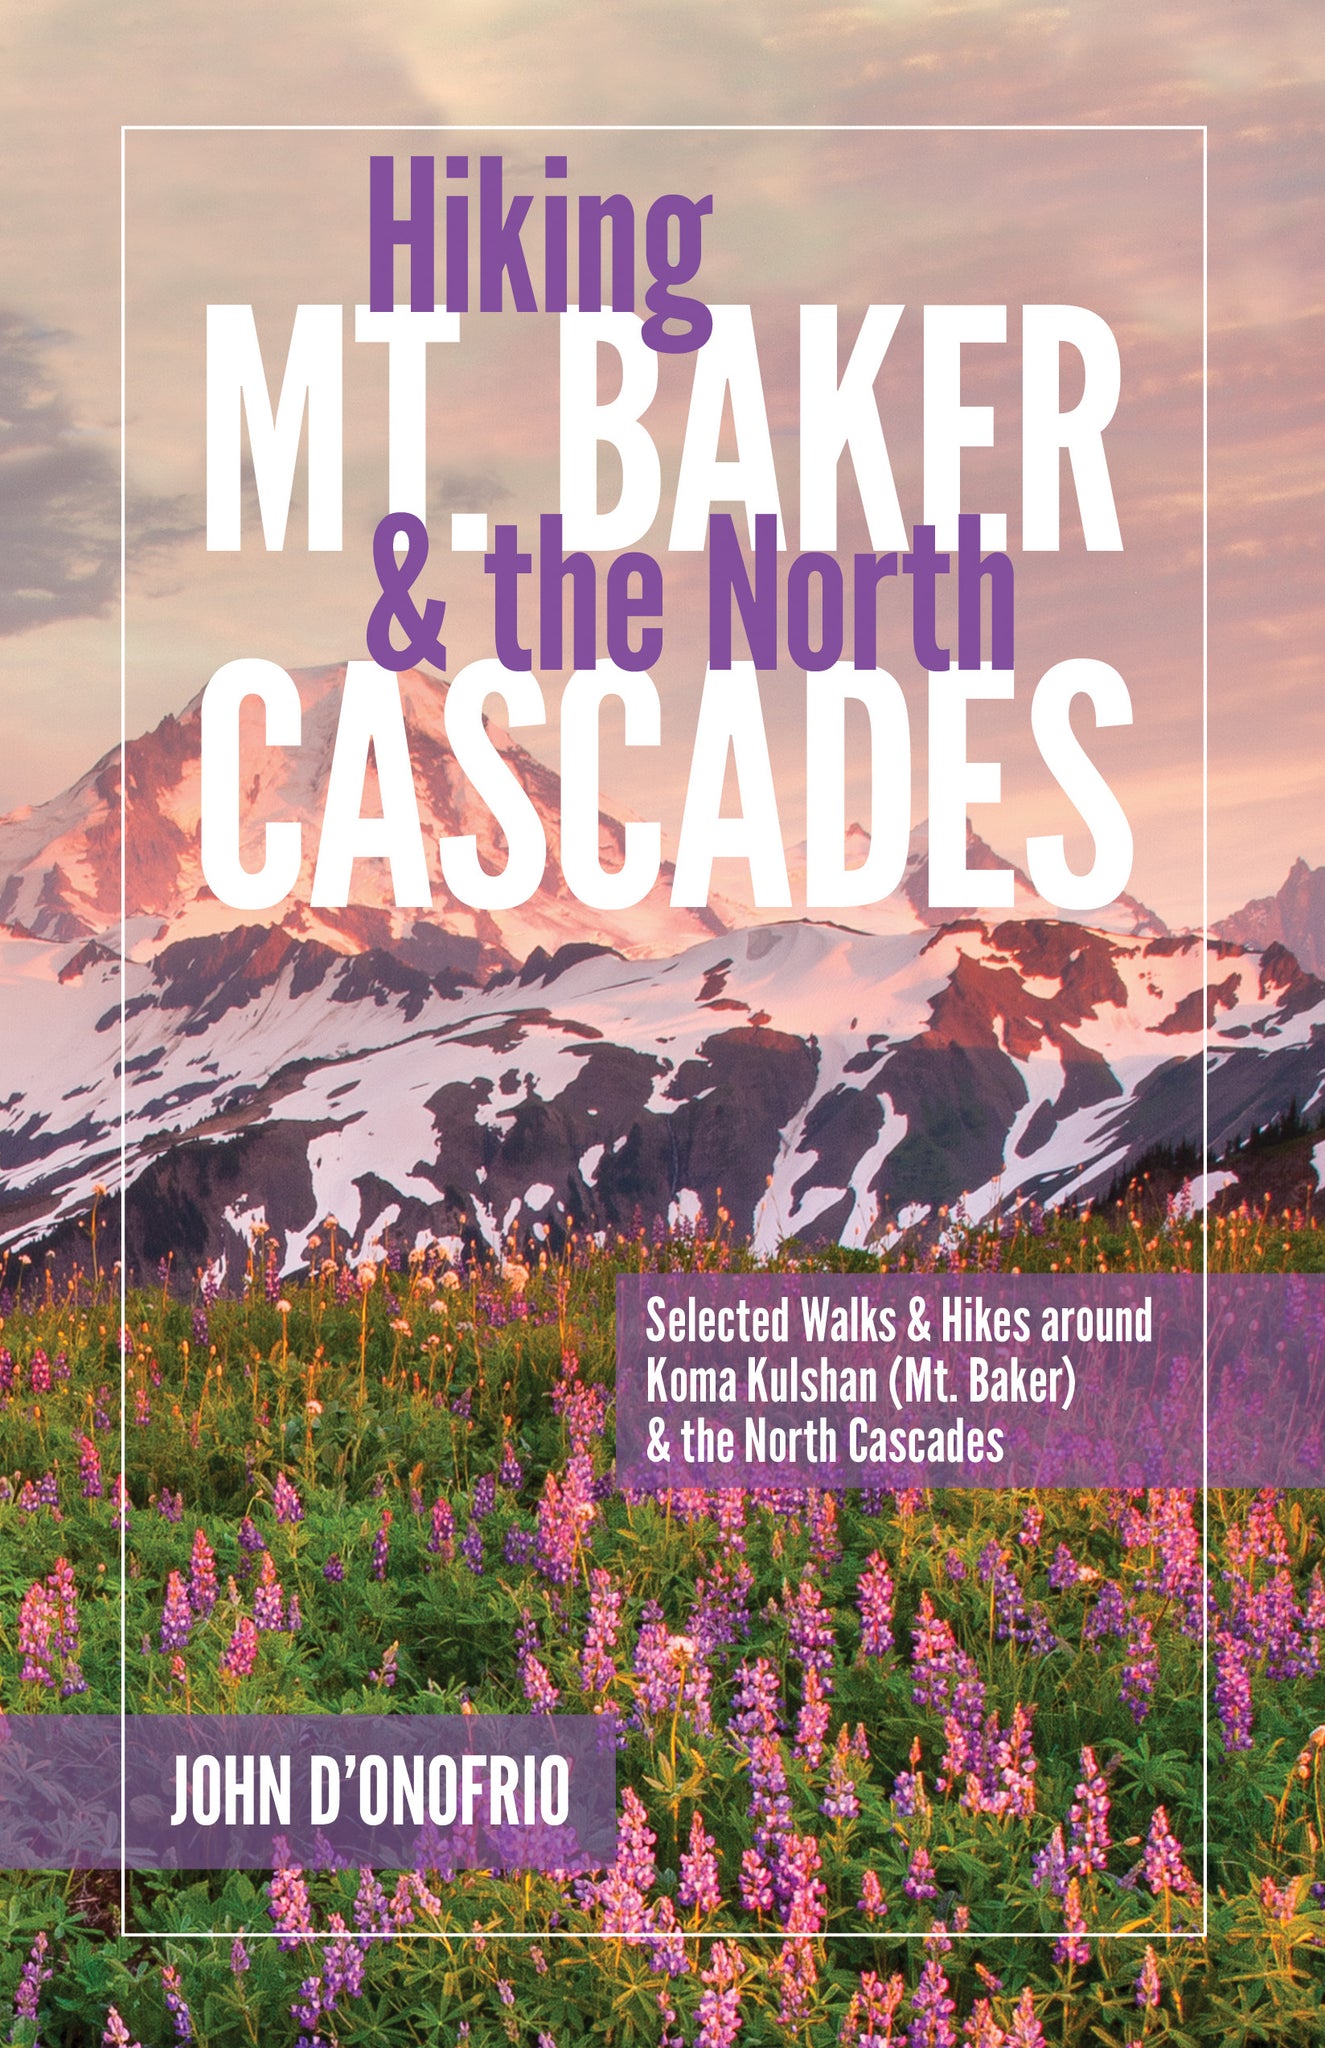 Hiking Mt Baker and the North Cascades: Selected walks and hikes around Koma Kulshan and the North Cascades